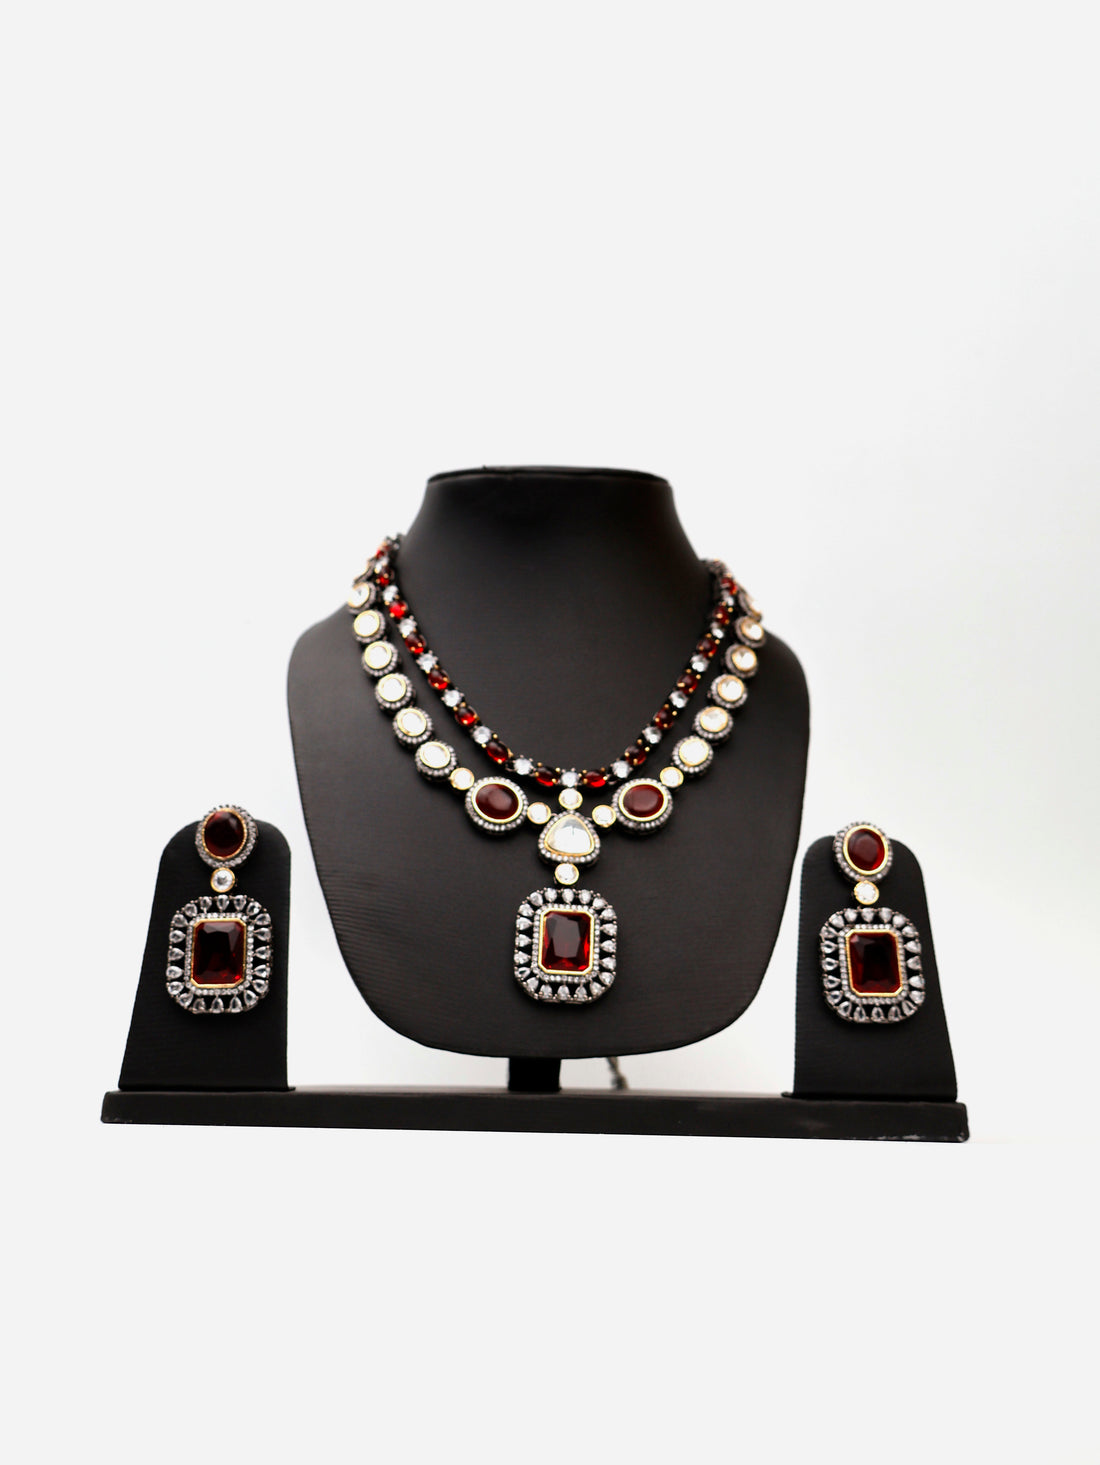 Red Garnet Stone and Kundan work Reverse AD Two Layer Necklace Set Fashion Jewelry for Party Festival Wedding Occasion in Noida